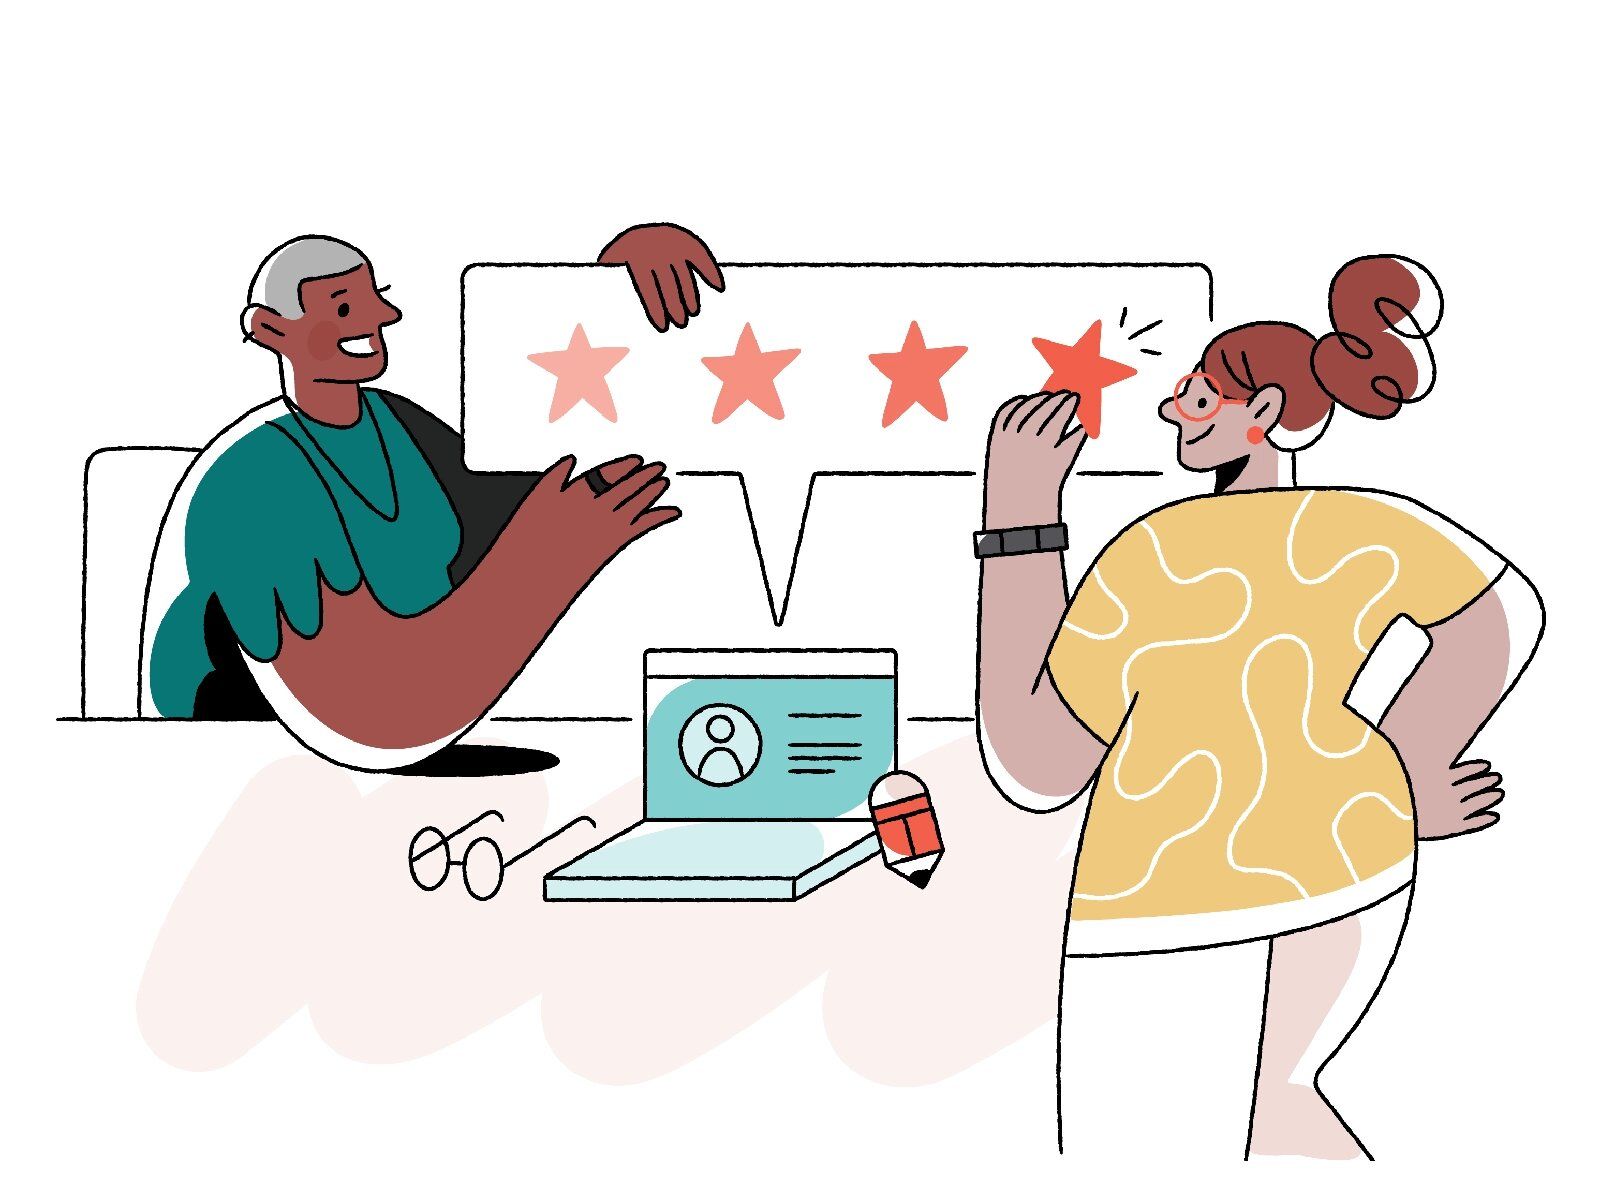 In a review both scrum team members and stakeholders are taking a closer look at what was already achieved during the previous sprint (*image by [Amanda ☻rtiz](https://dribbble.com/AmandaOrtiz){ rel="nofollow" target="_blank" .default-md}*)